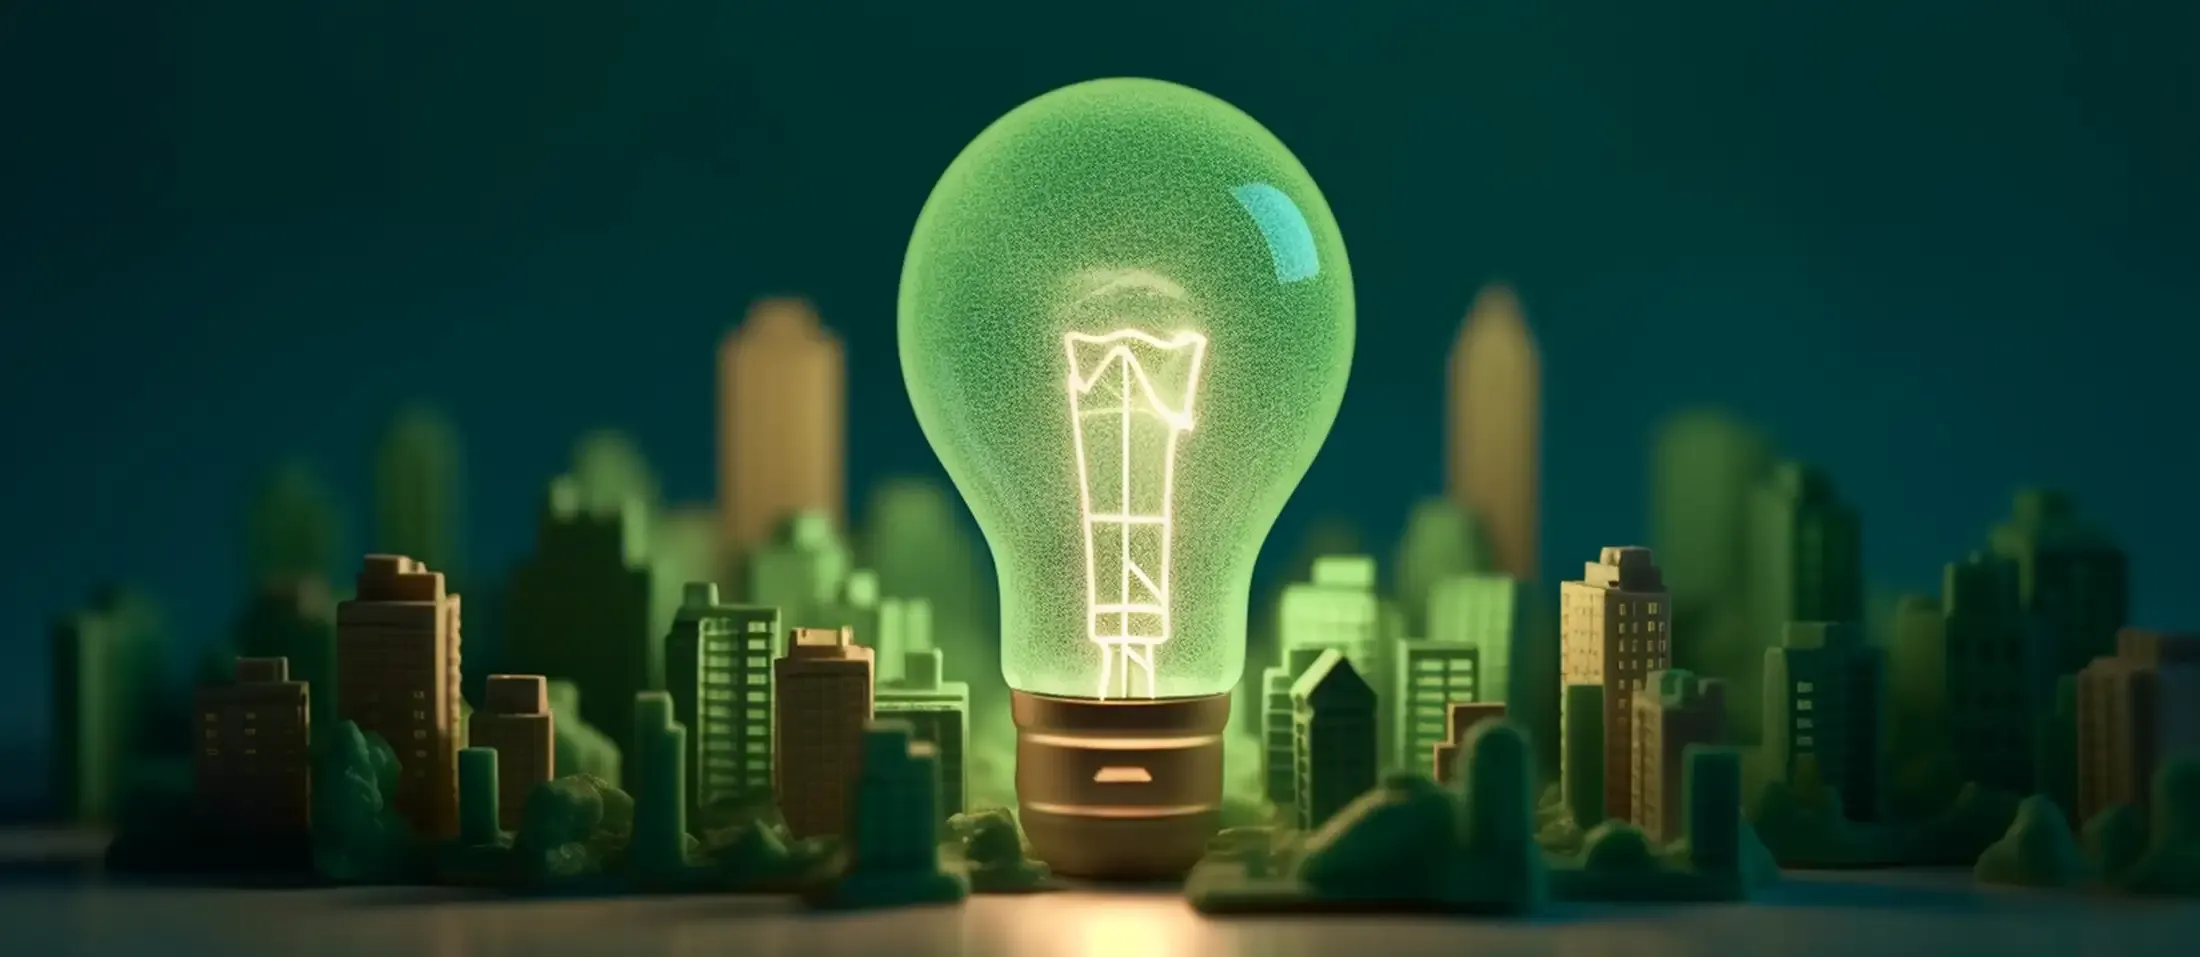 Humans of Cleantech: A Lightbulb Moment Ignites a Movement